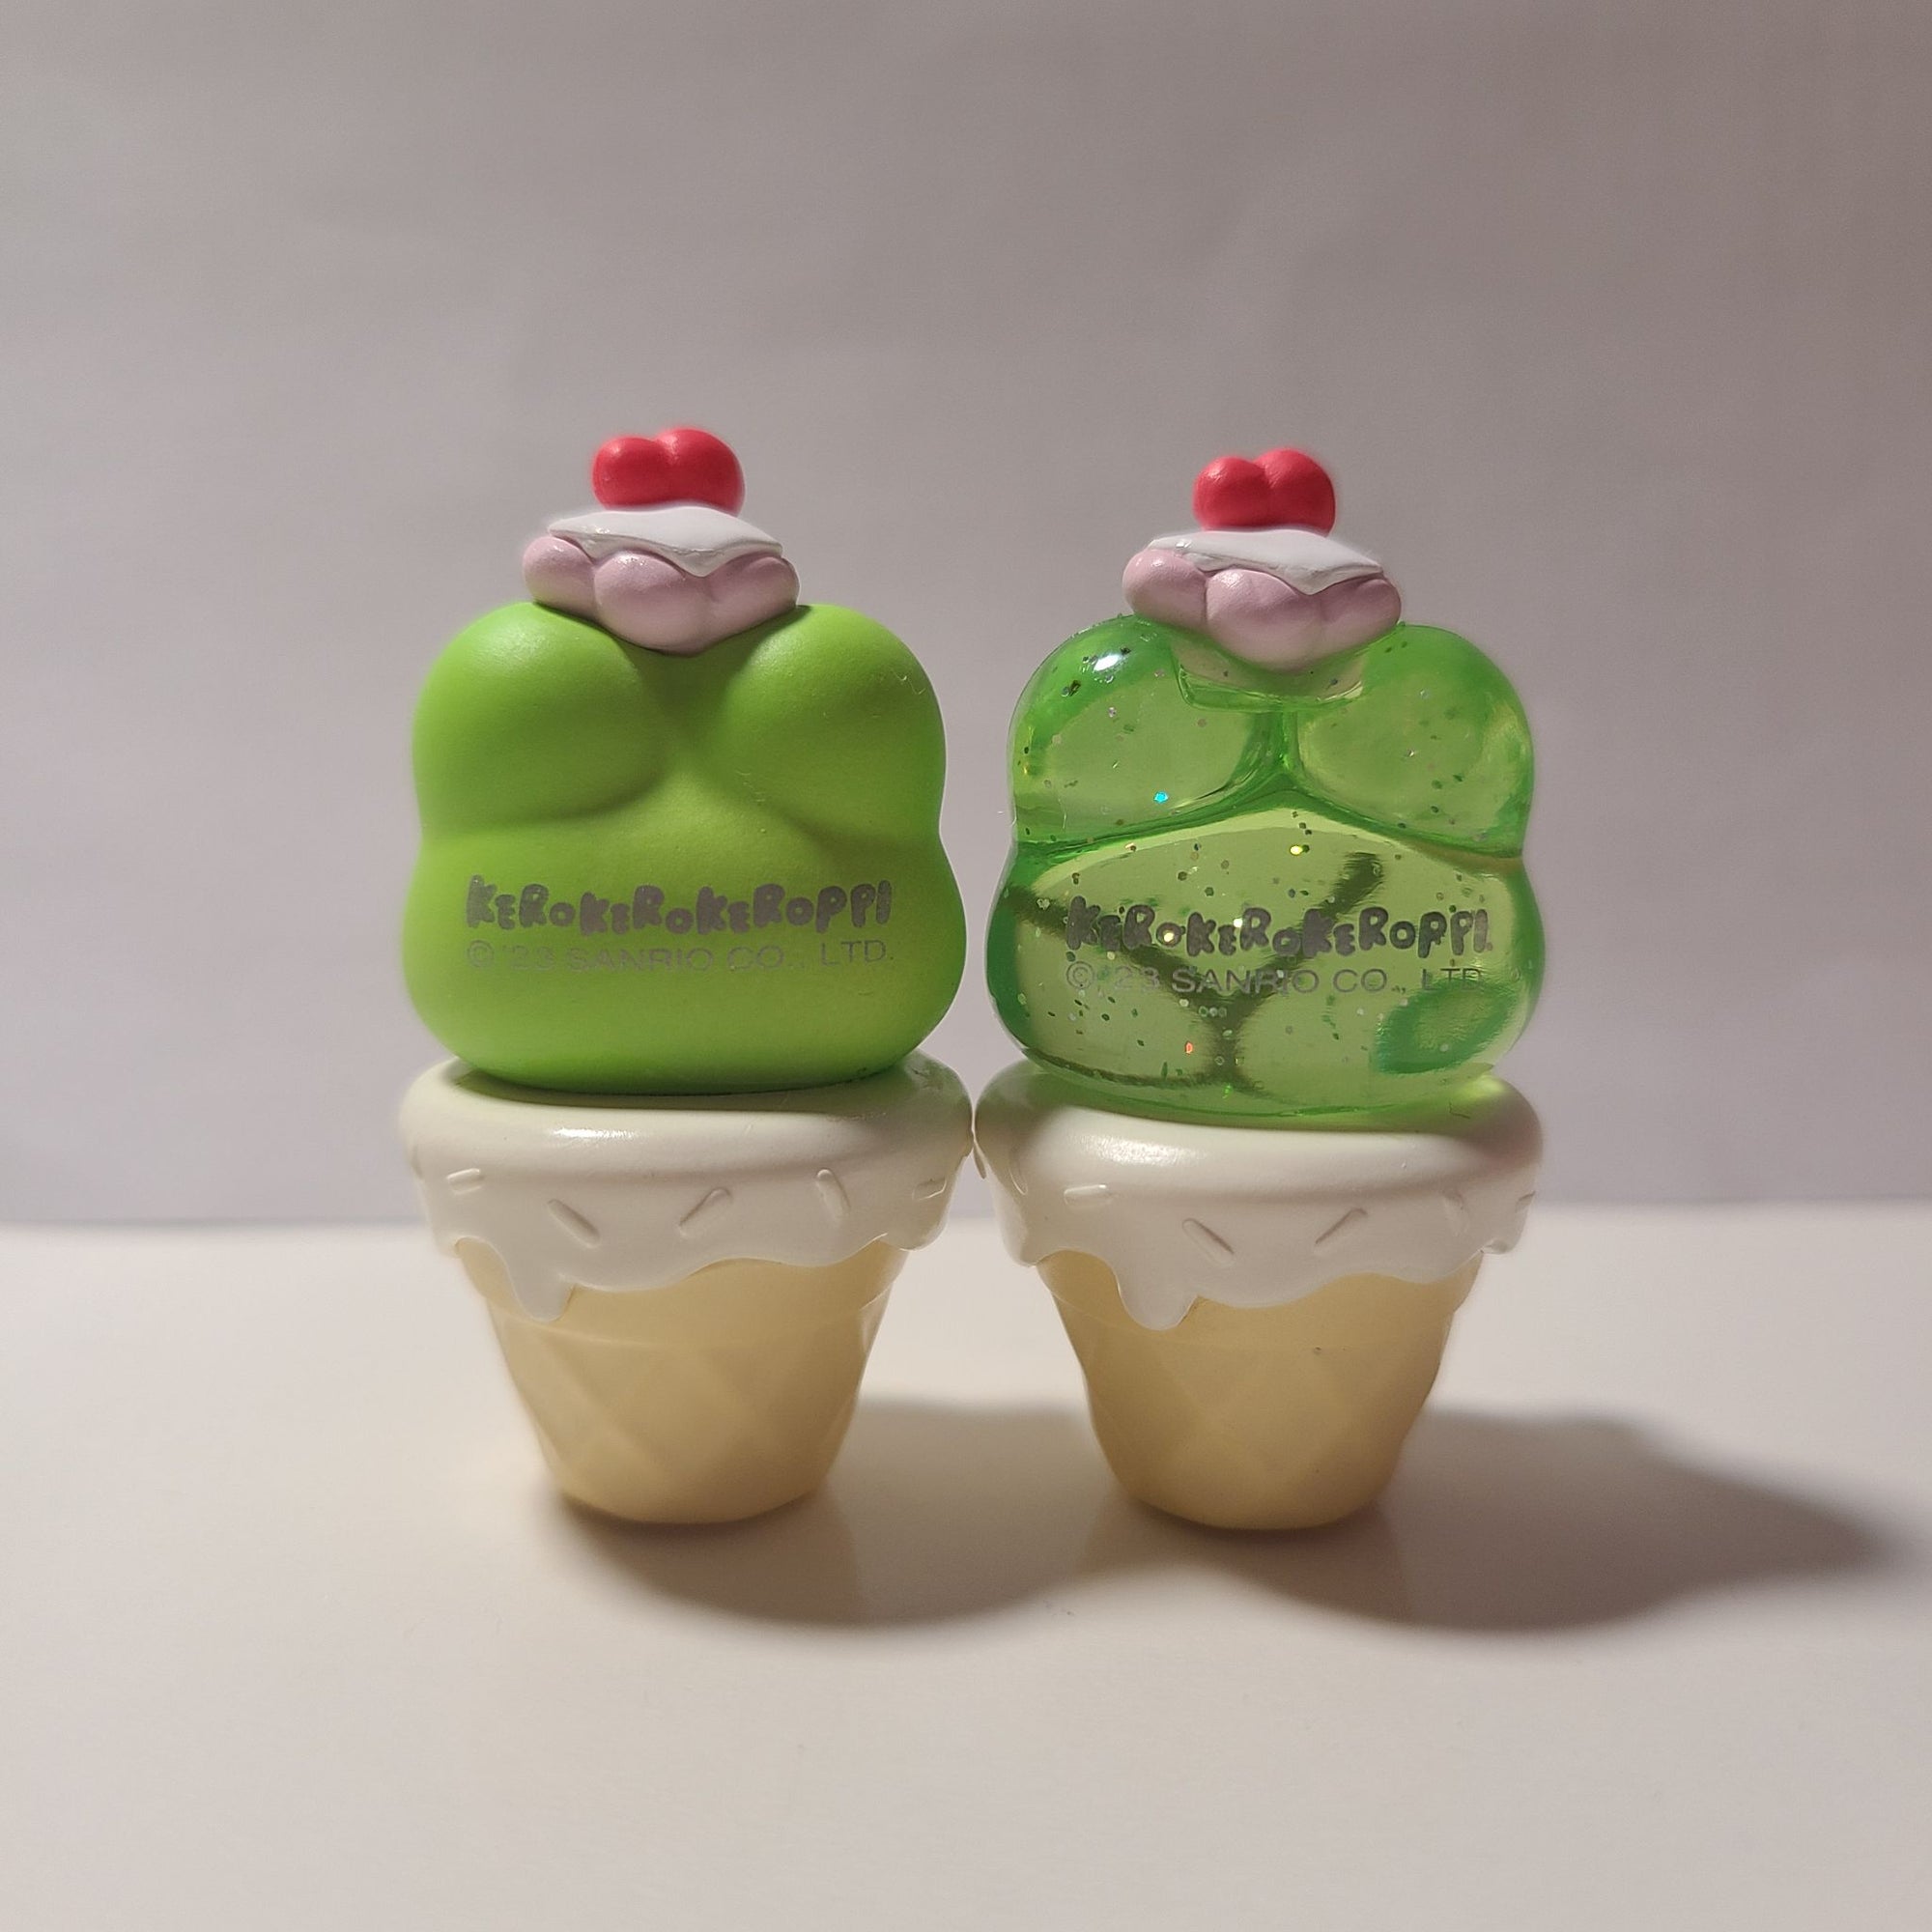 Keroppi (Set of 2) - Sanrio Characters Mini Ice Cream Cone Series by Top Toy - 2